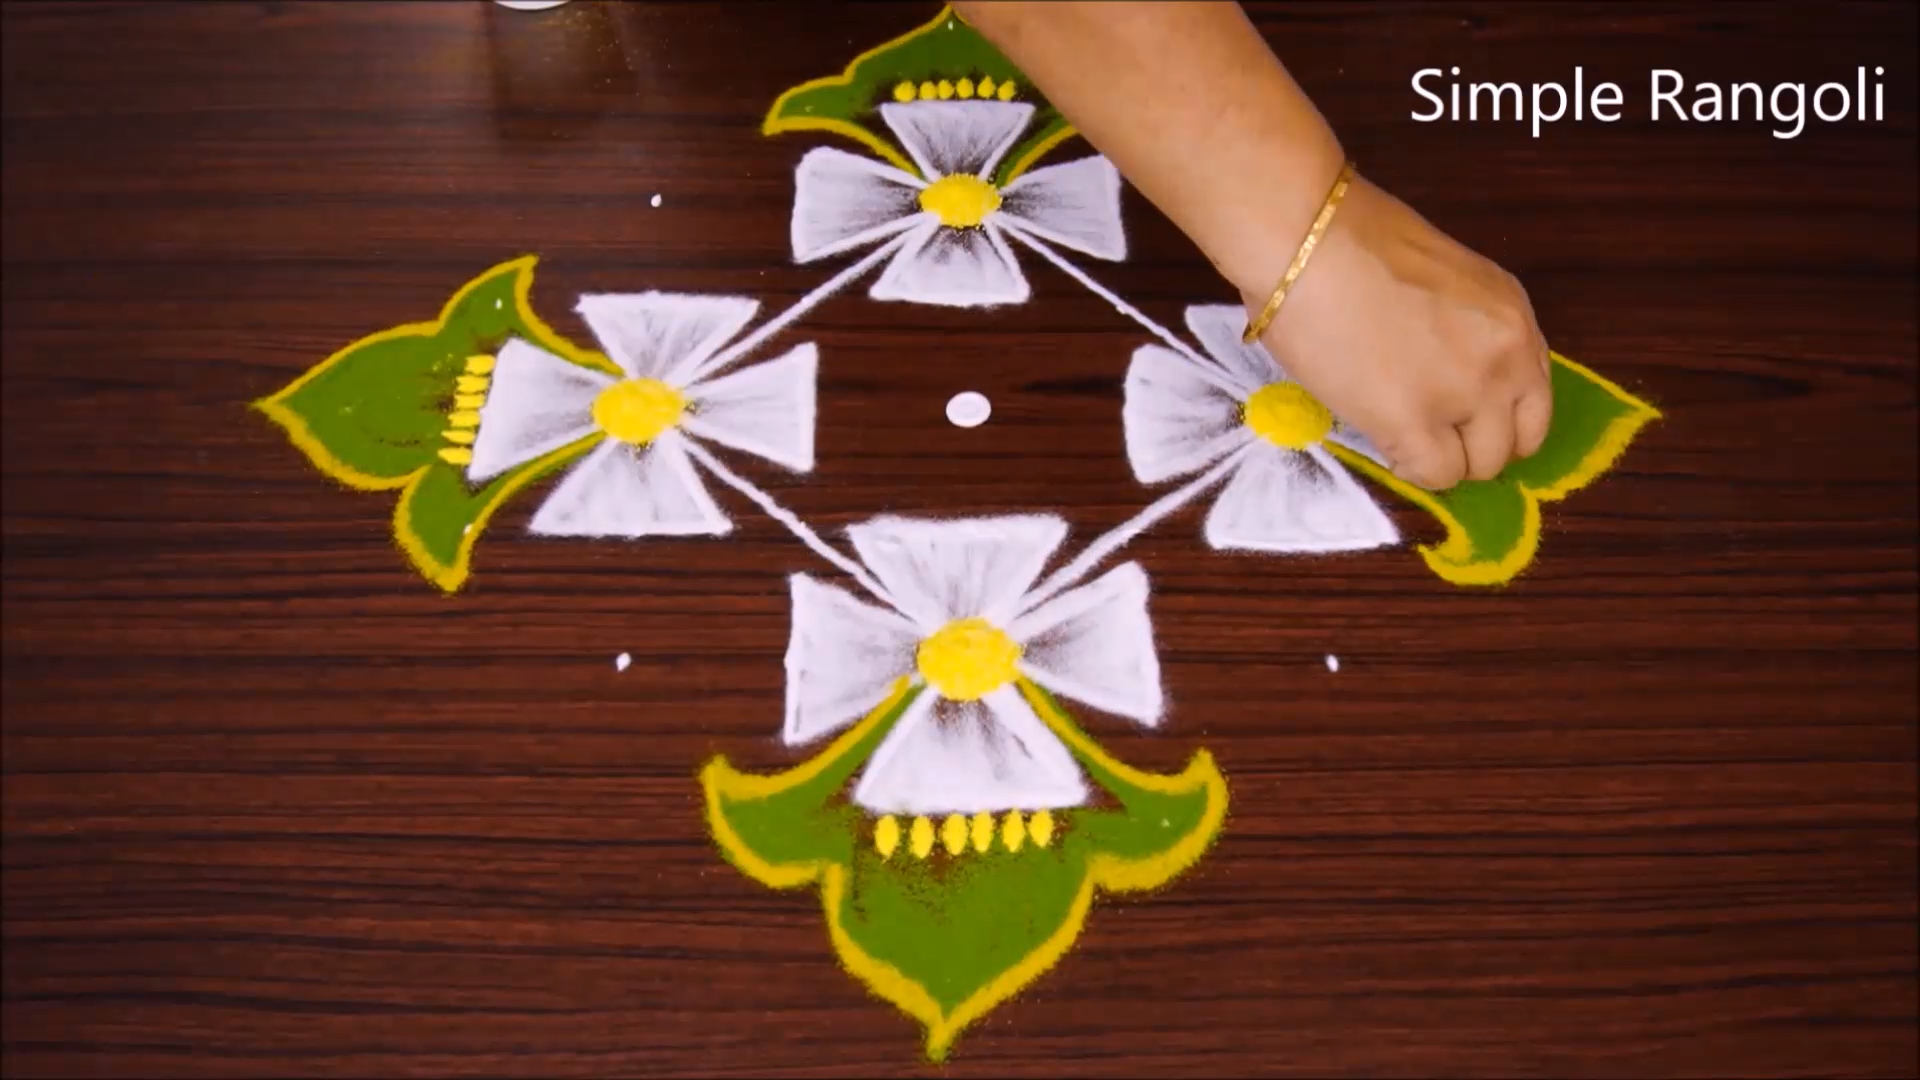 Simple Rangoli Designs With Dots - Simple Rangoli Designs With Dots -   beauty Design flower